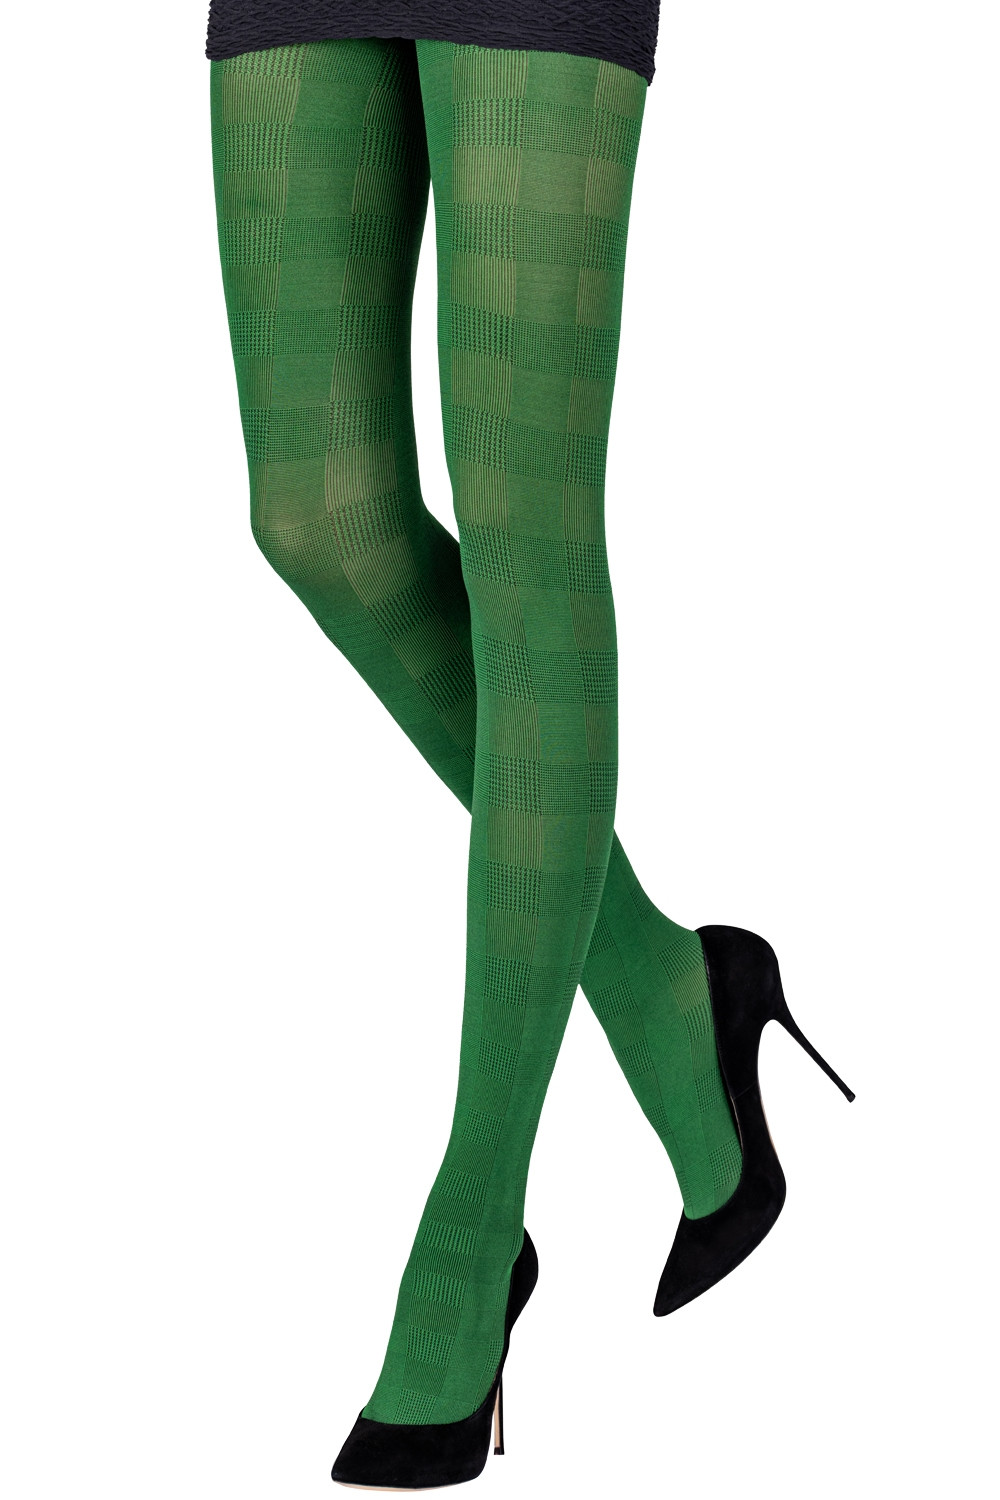 Green Tights for Women